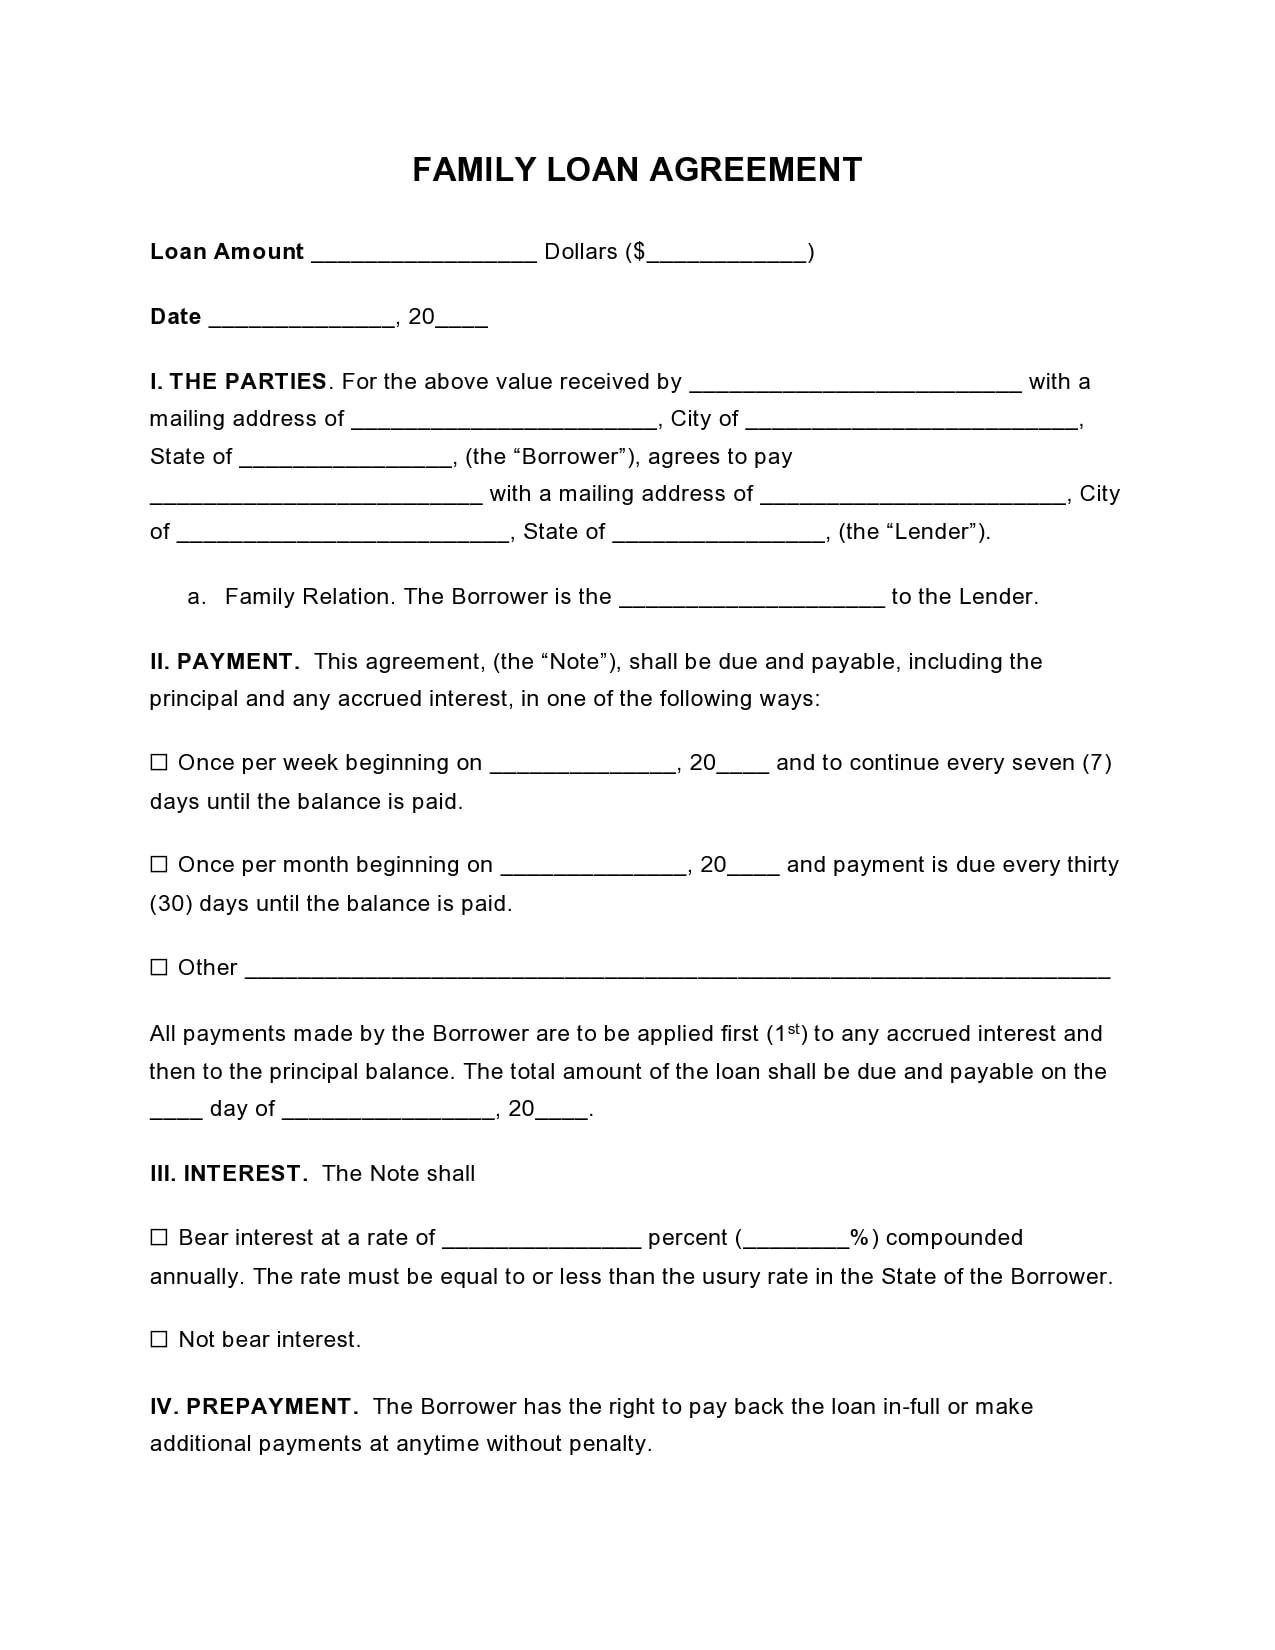 22 Simple Family Loan Agreement Templates (22% Free) Pertaining To family loan agreement template free